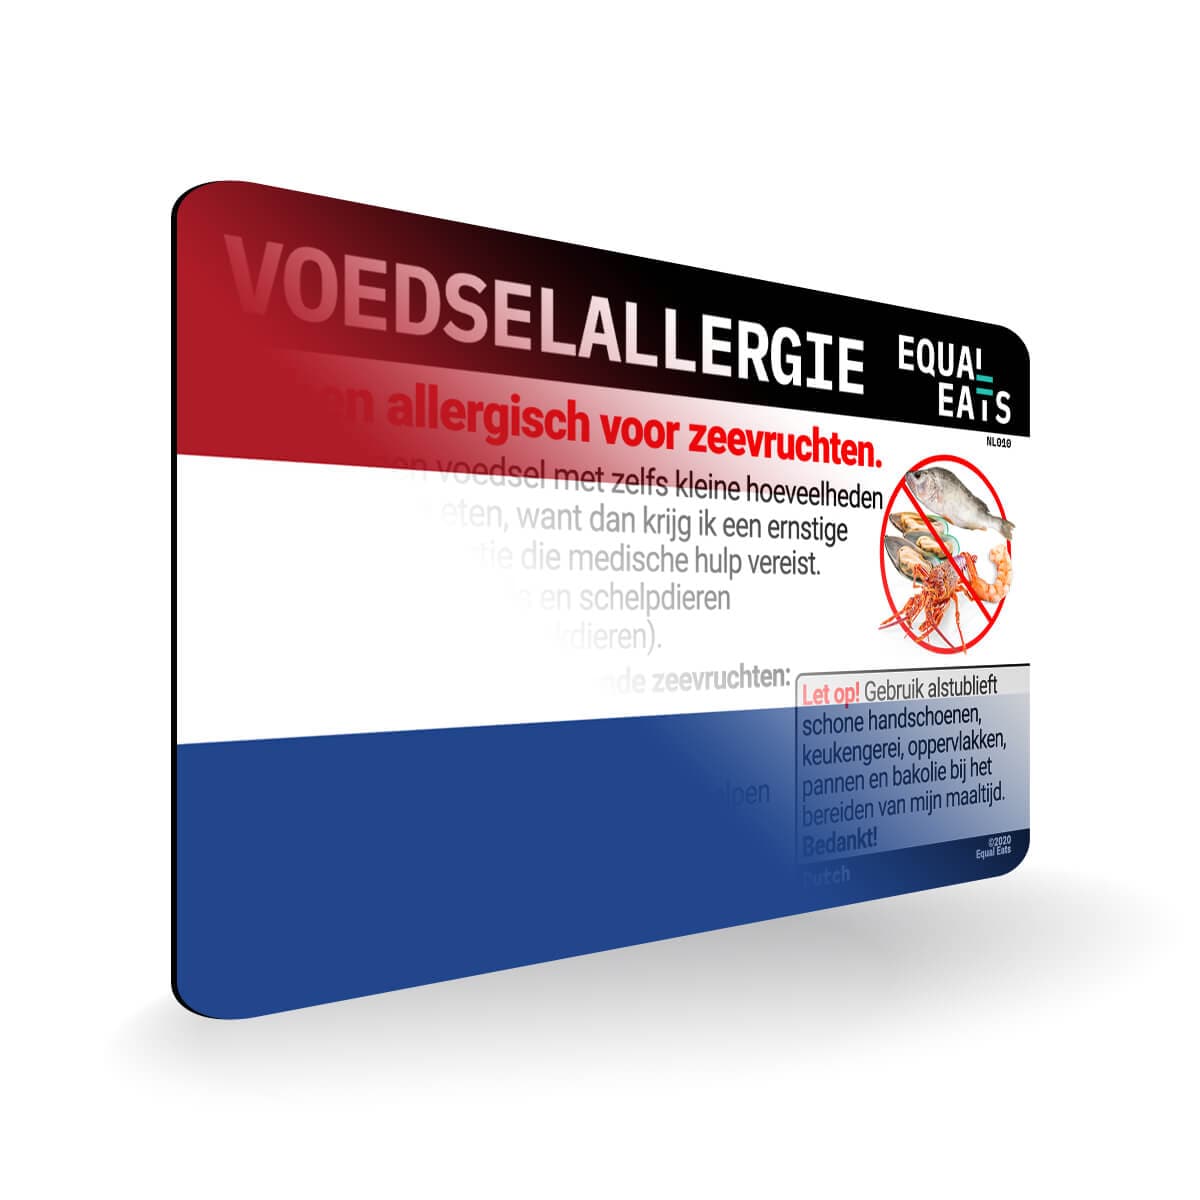 Seafood Allergy in Dutch. Seafood Allergy Card for Netherlands